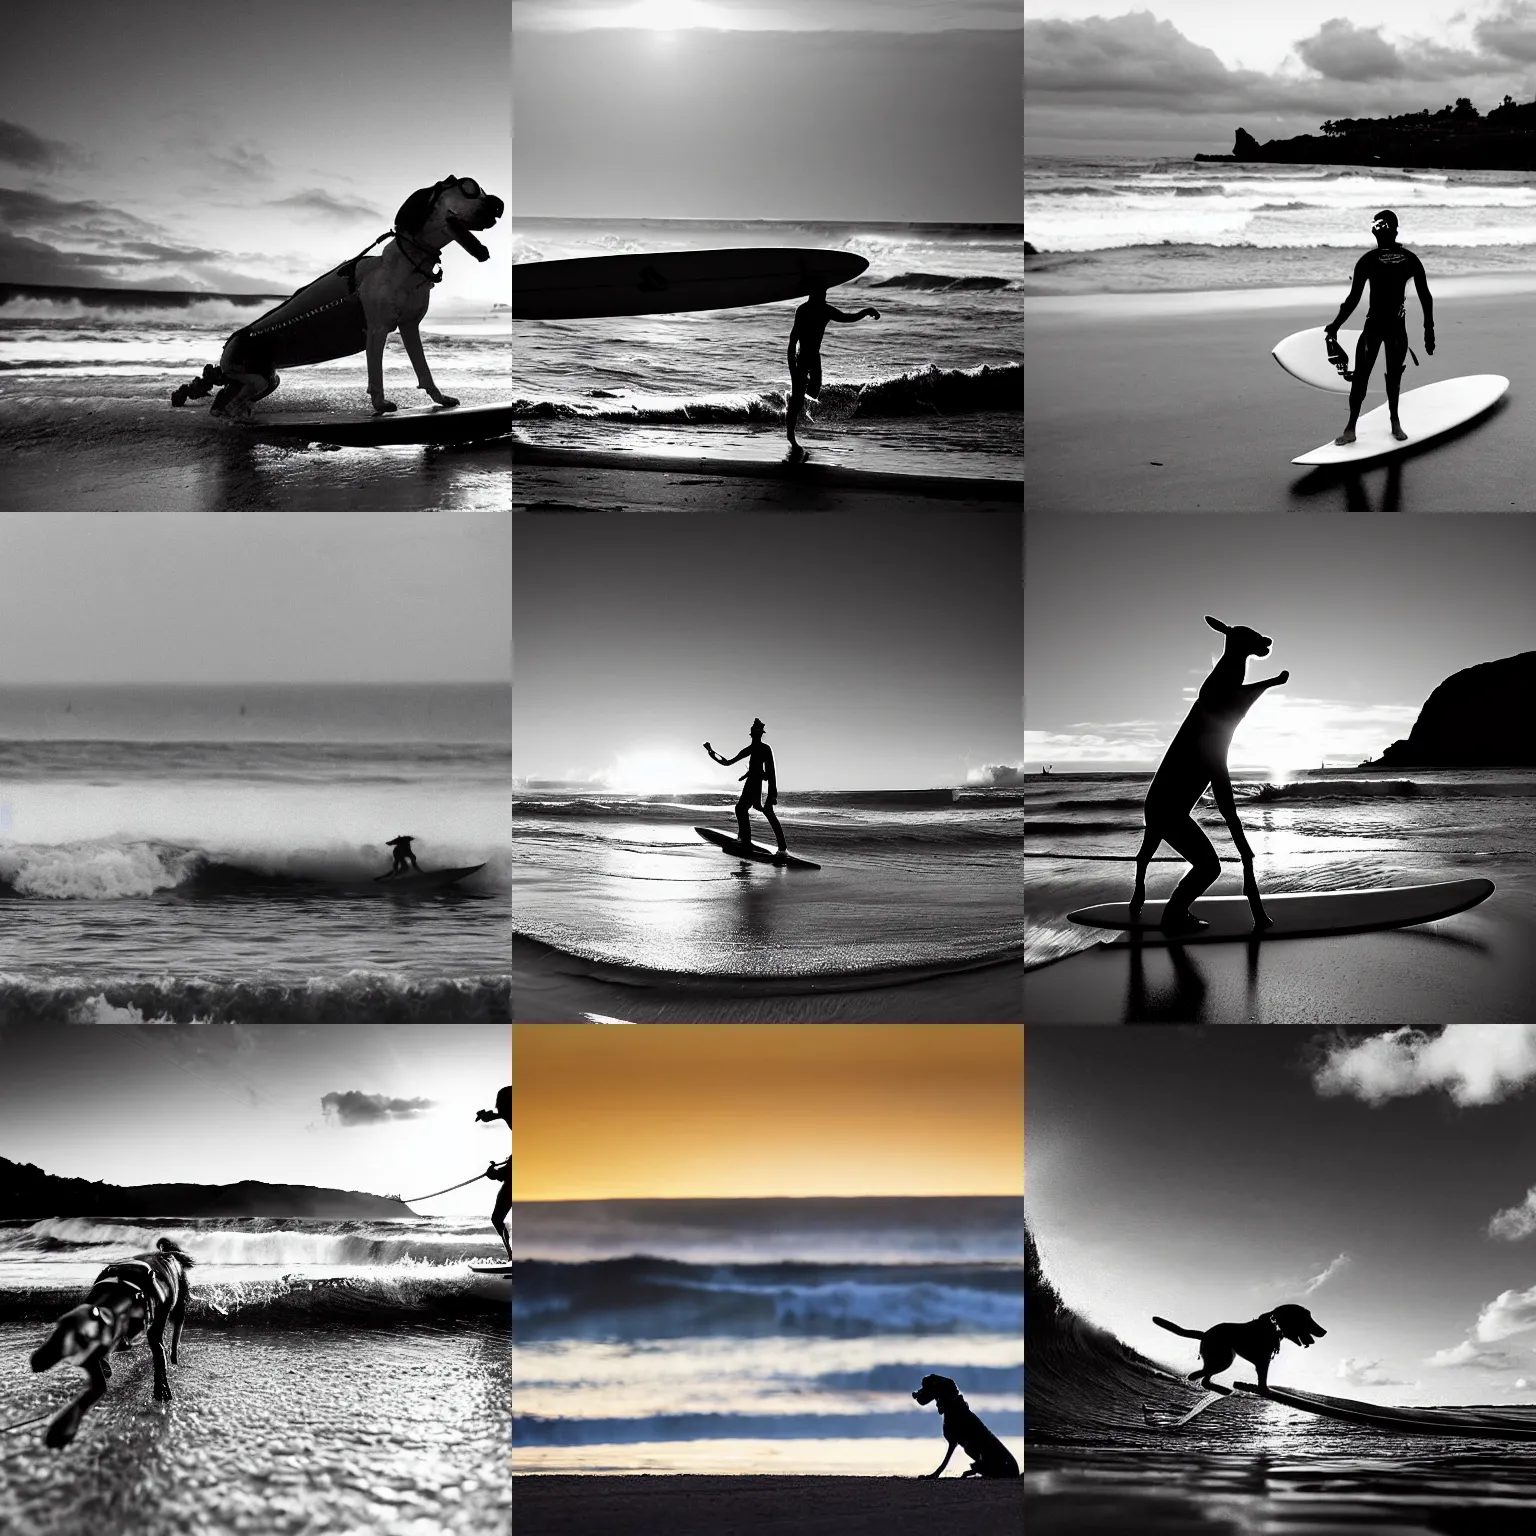 Prompt: a cyborg dog wearing welding goggles surfs a wave in waimea bay on a 1 0 - foot wooden longboard at sunset, black and white film photograph